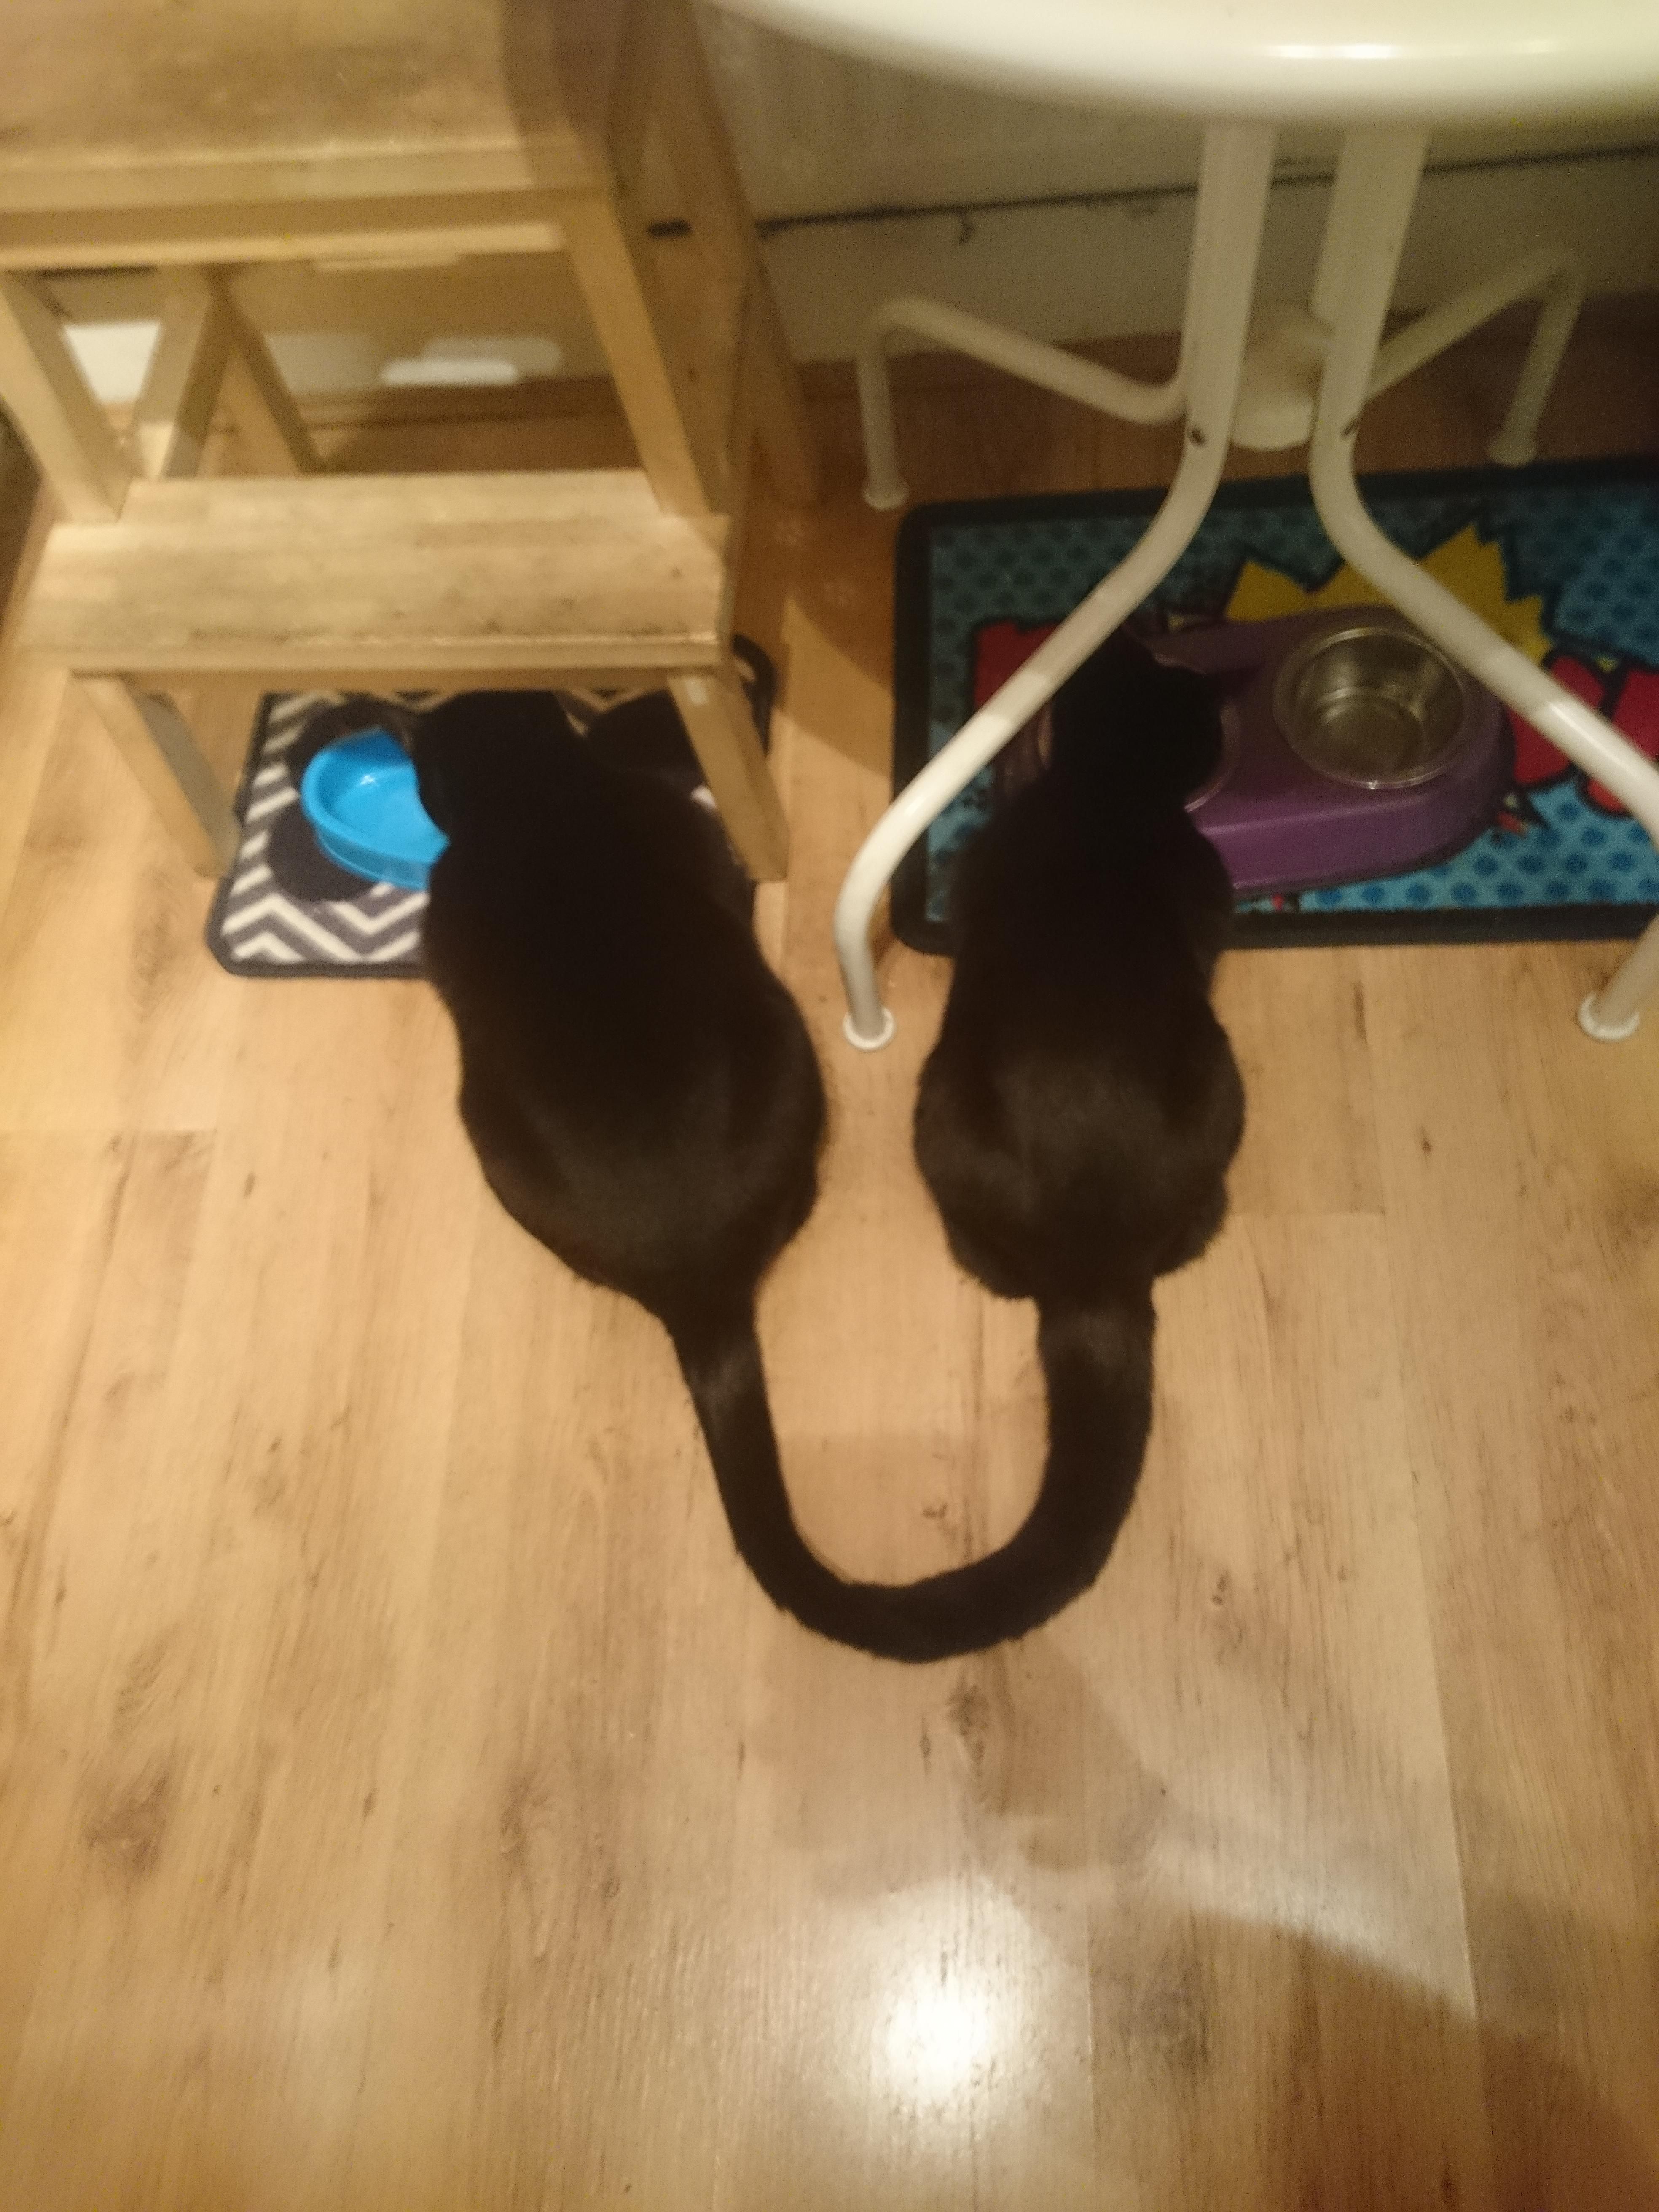 My cats eating together look as if they are joined at the tail.